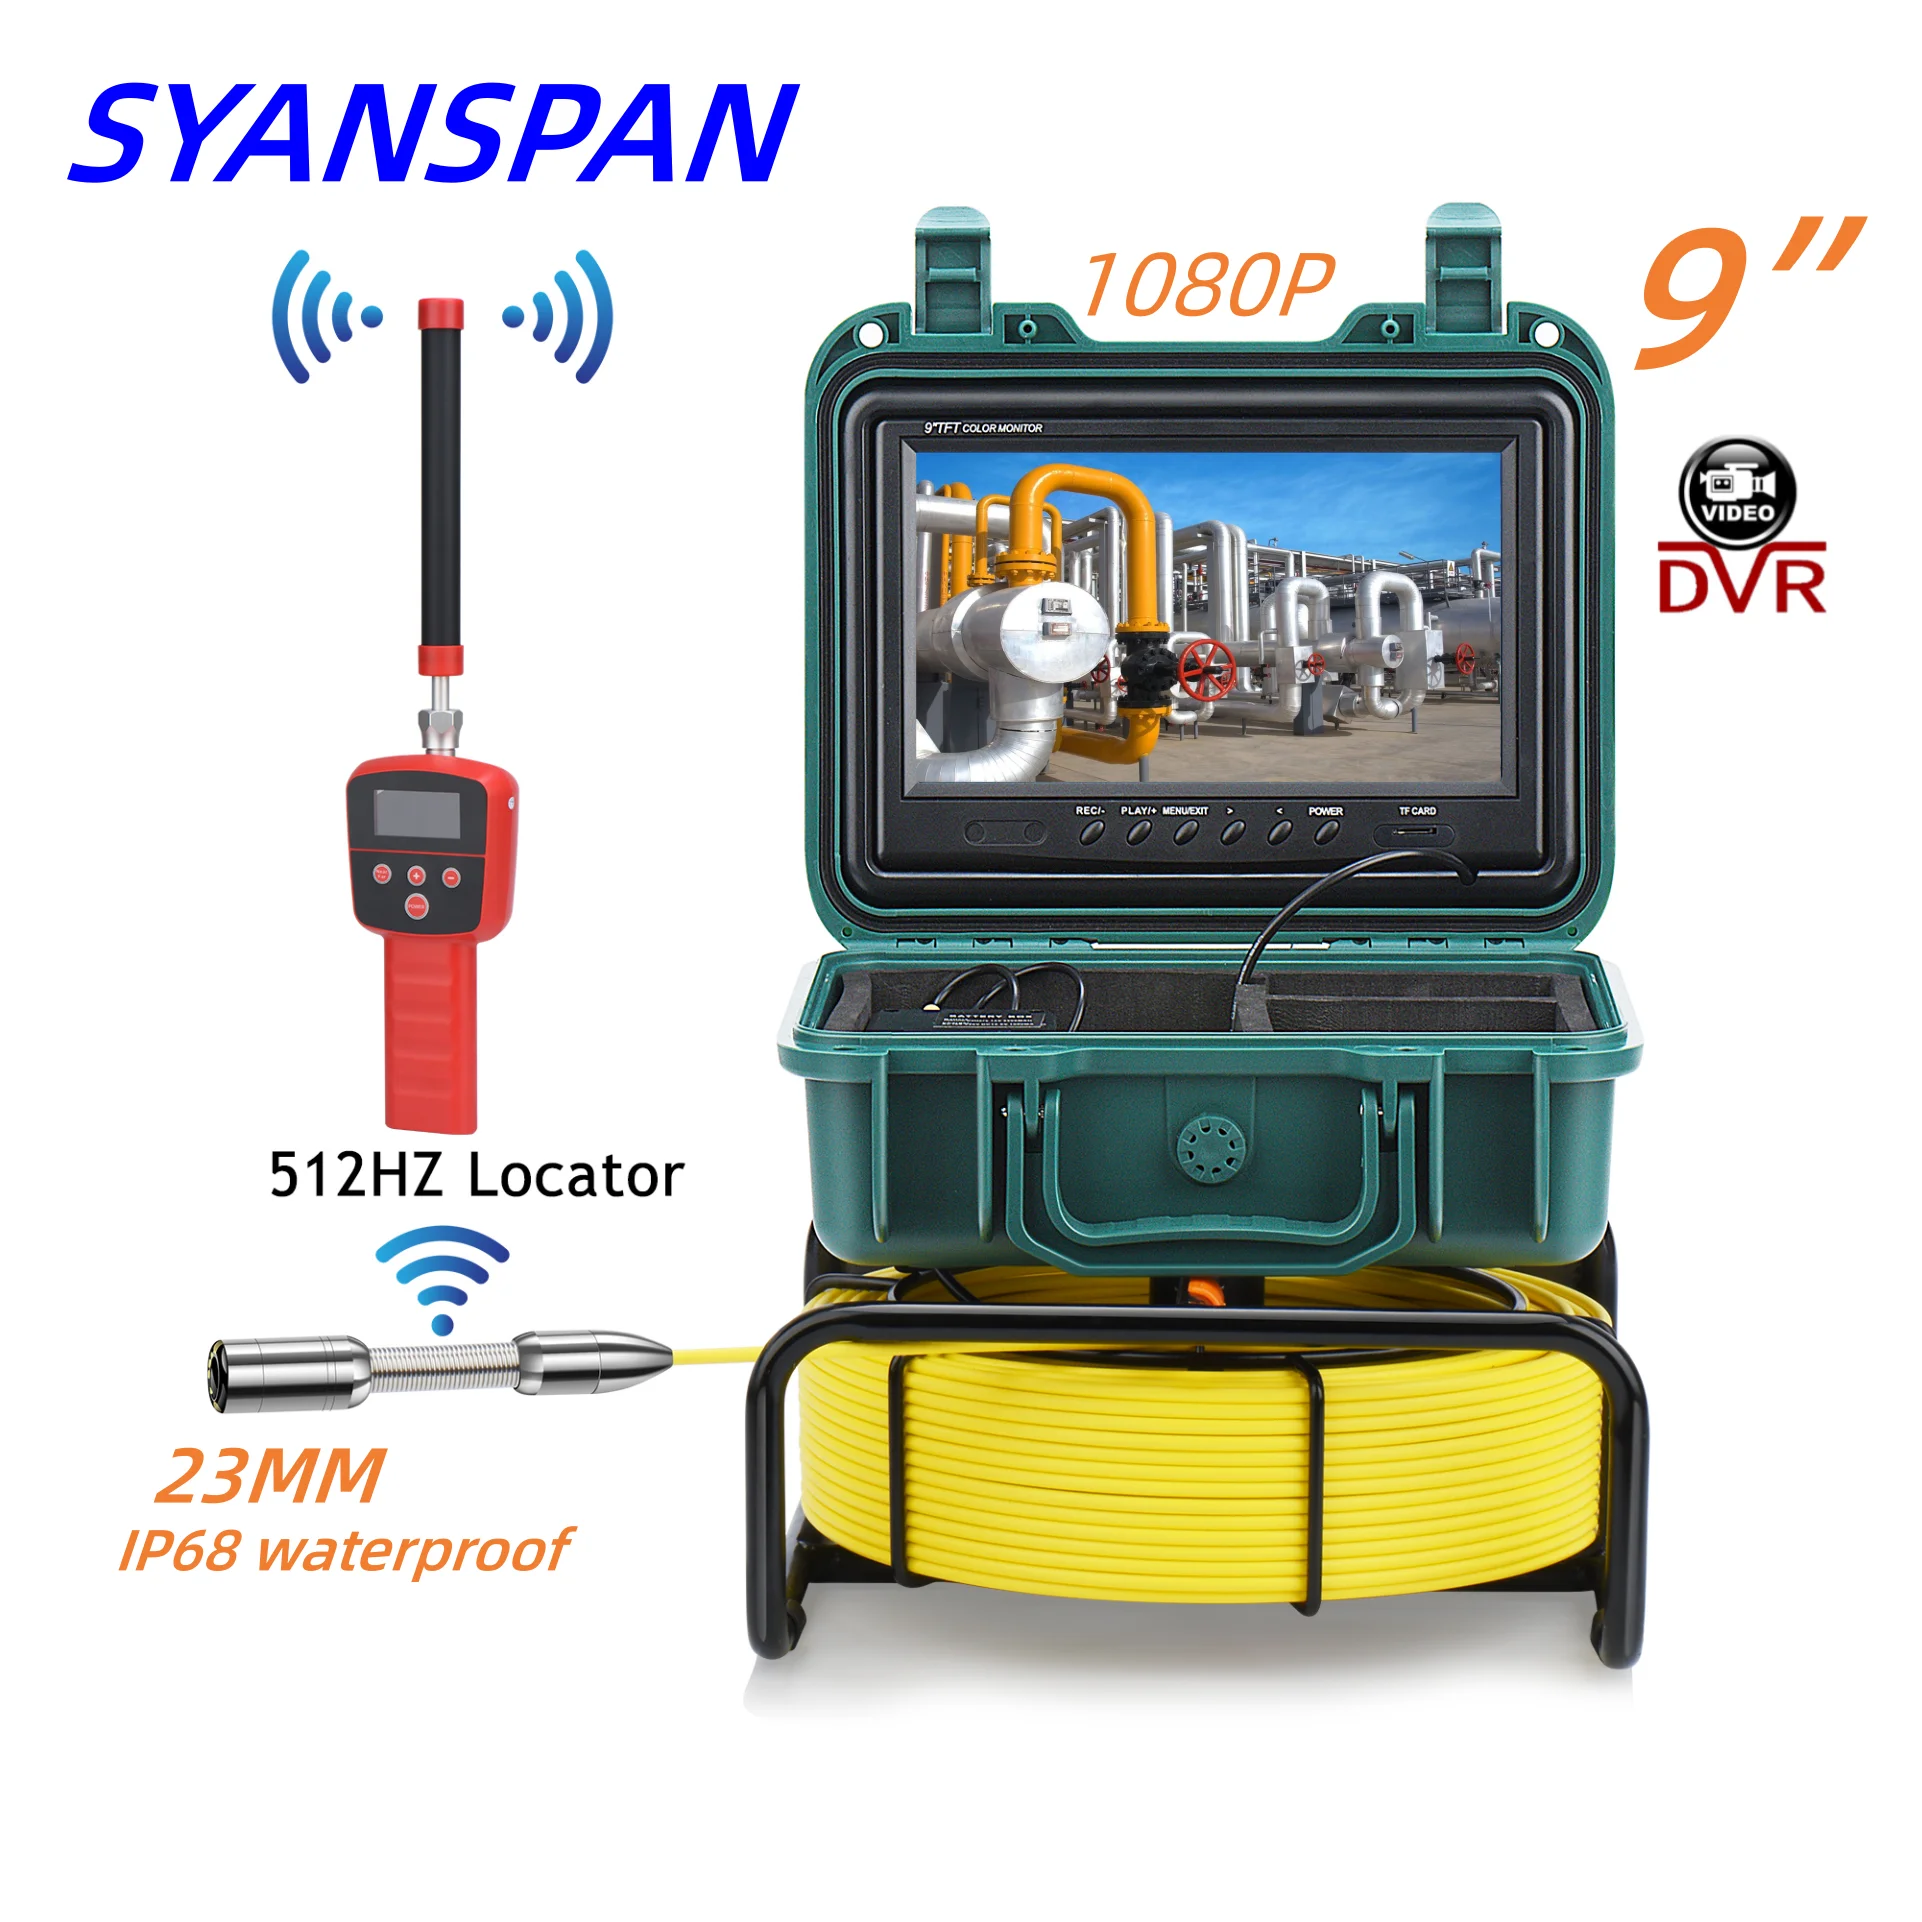 Pipeline Inspection Camera 9-inch HD Screen 8X Enlarged Video Recording IP68 Waterproof 23MM Lens 512HZ Transmitter+Receiver